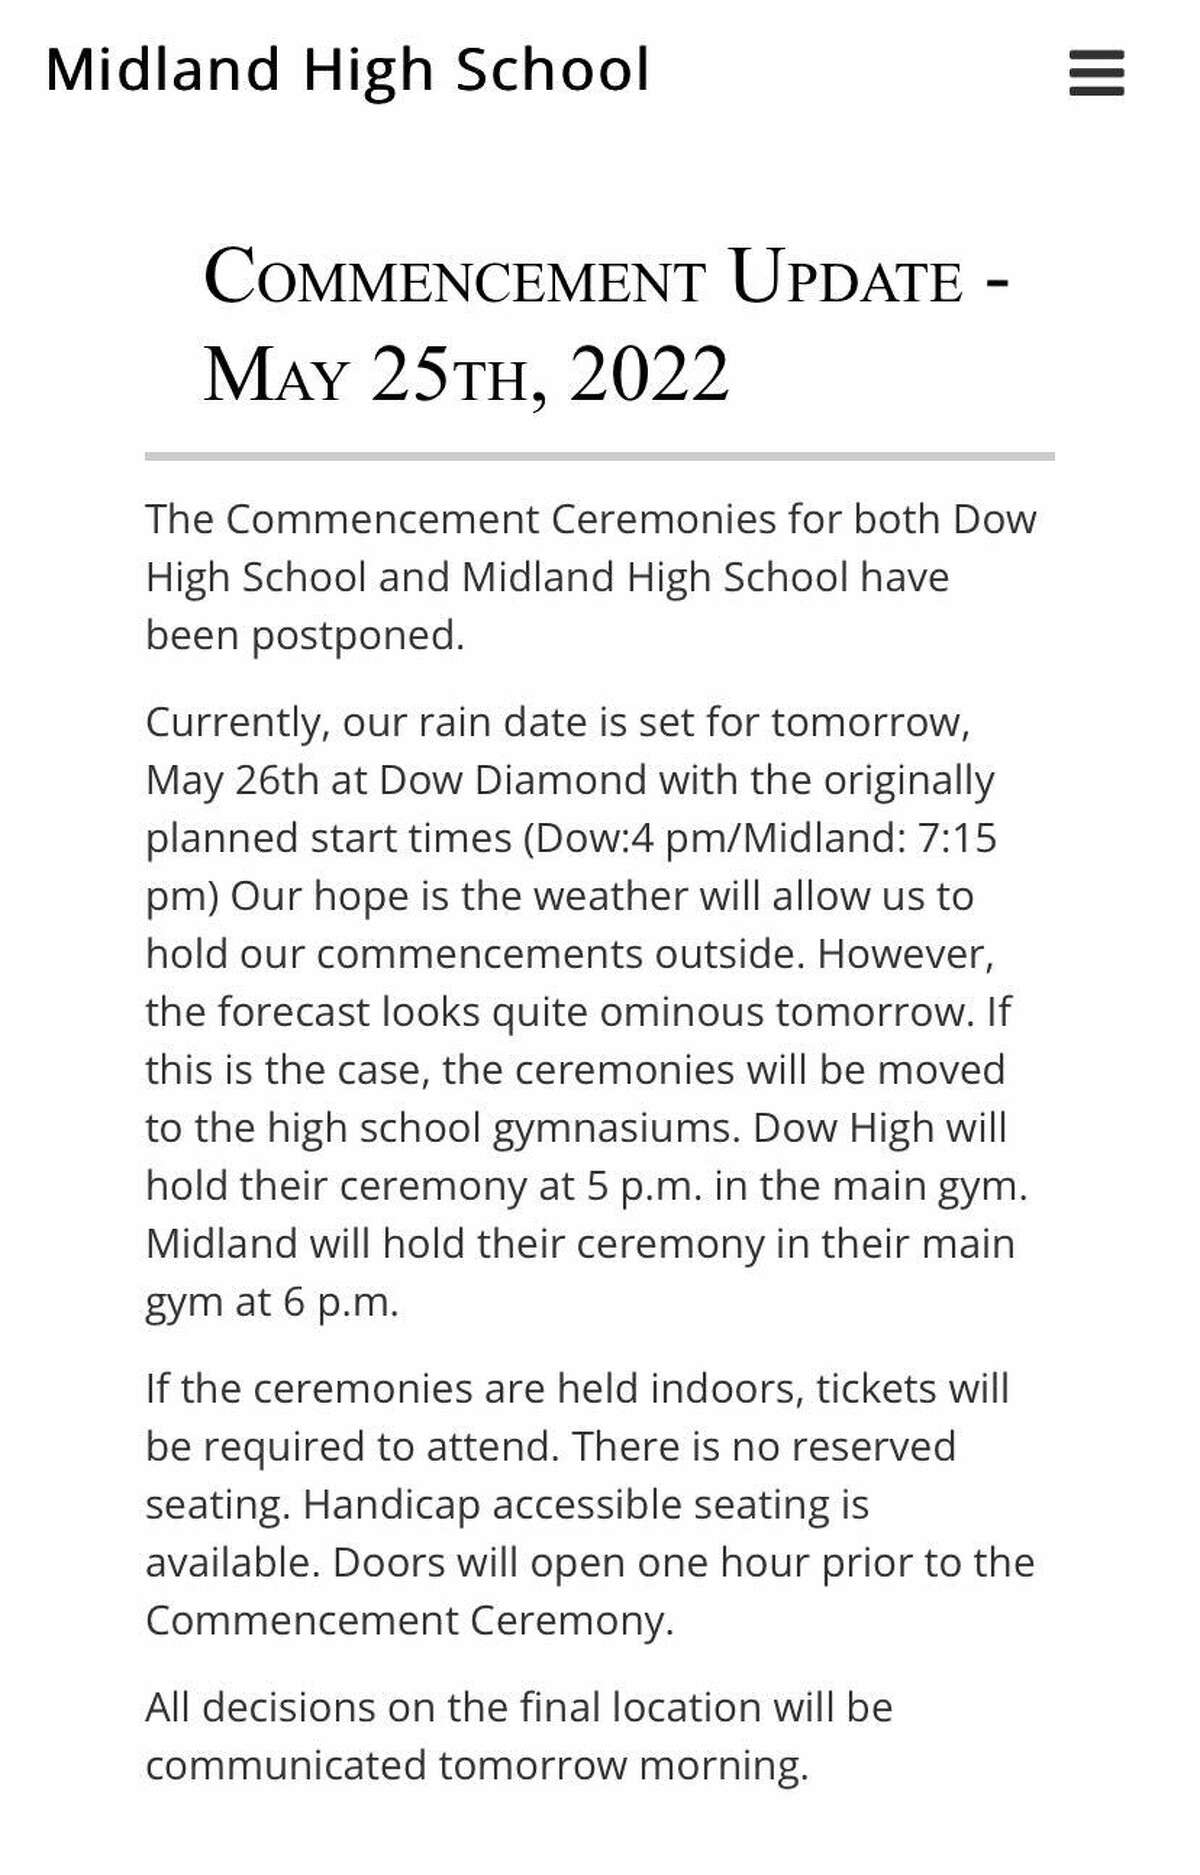 The full commencement update from Dow and Midland High Schools shares possible graduation event outcomes due to the May 25 and May 26 weather forecasts.